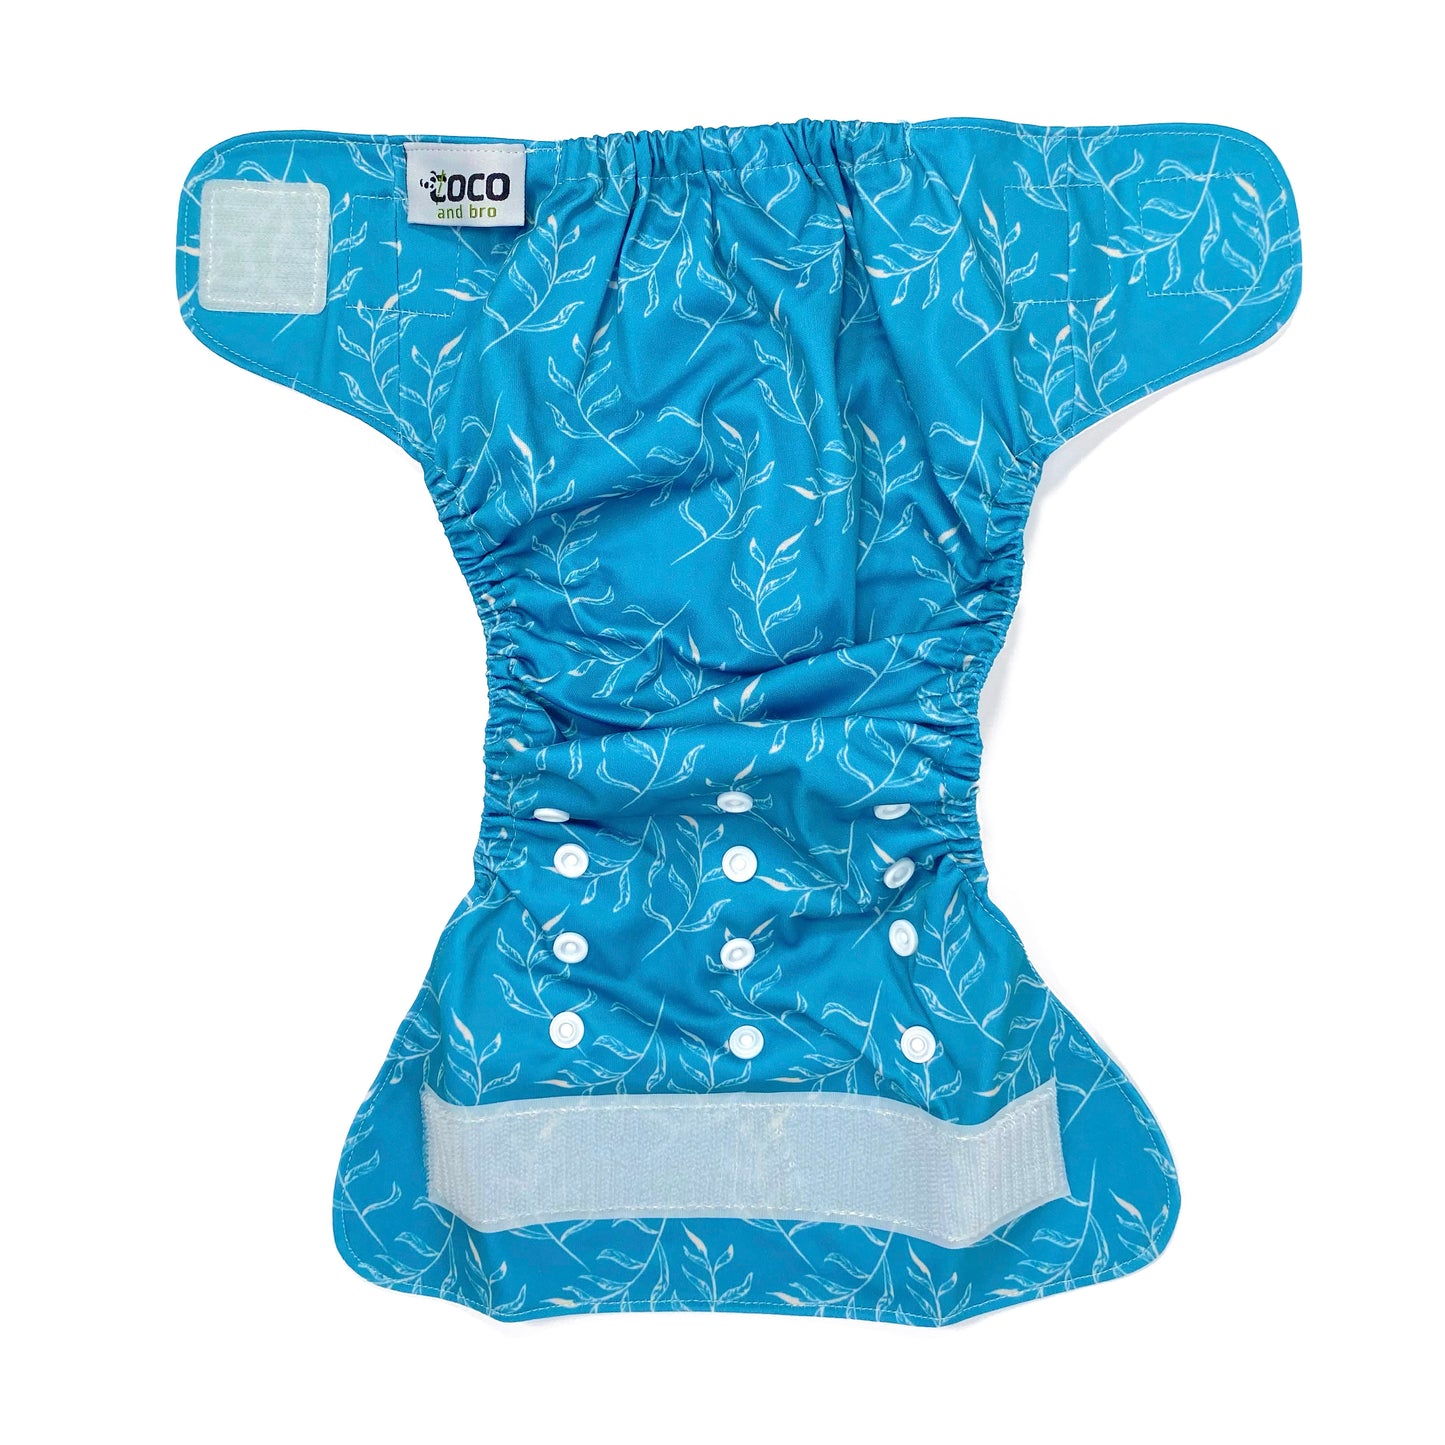 An adjustable reusable nappy for babies and toddlers, featuring a blue fern design, with images of white fern leaves on a blue background. View shows the full outside pattern of the nappy, with fastenings open.